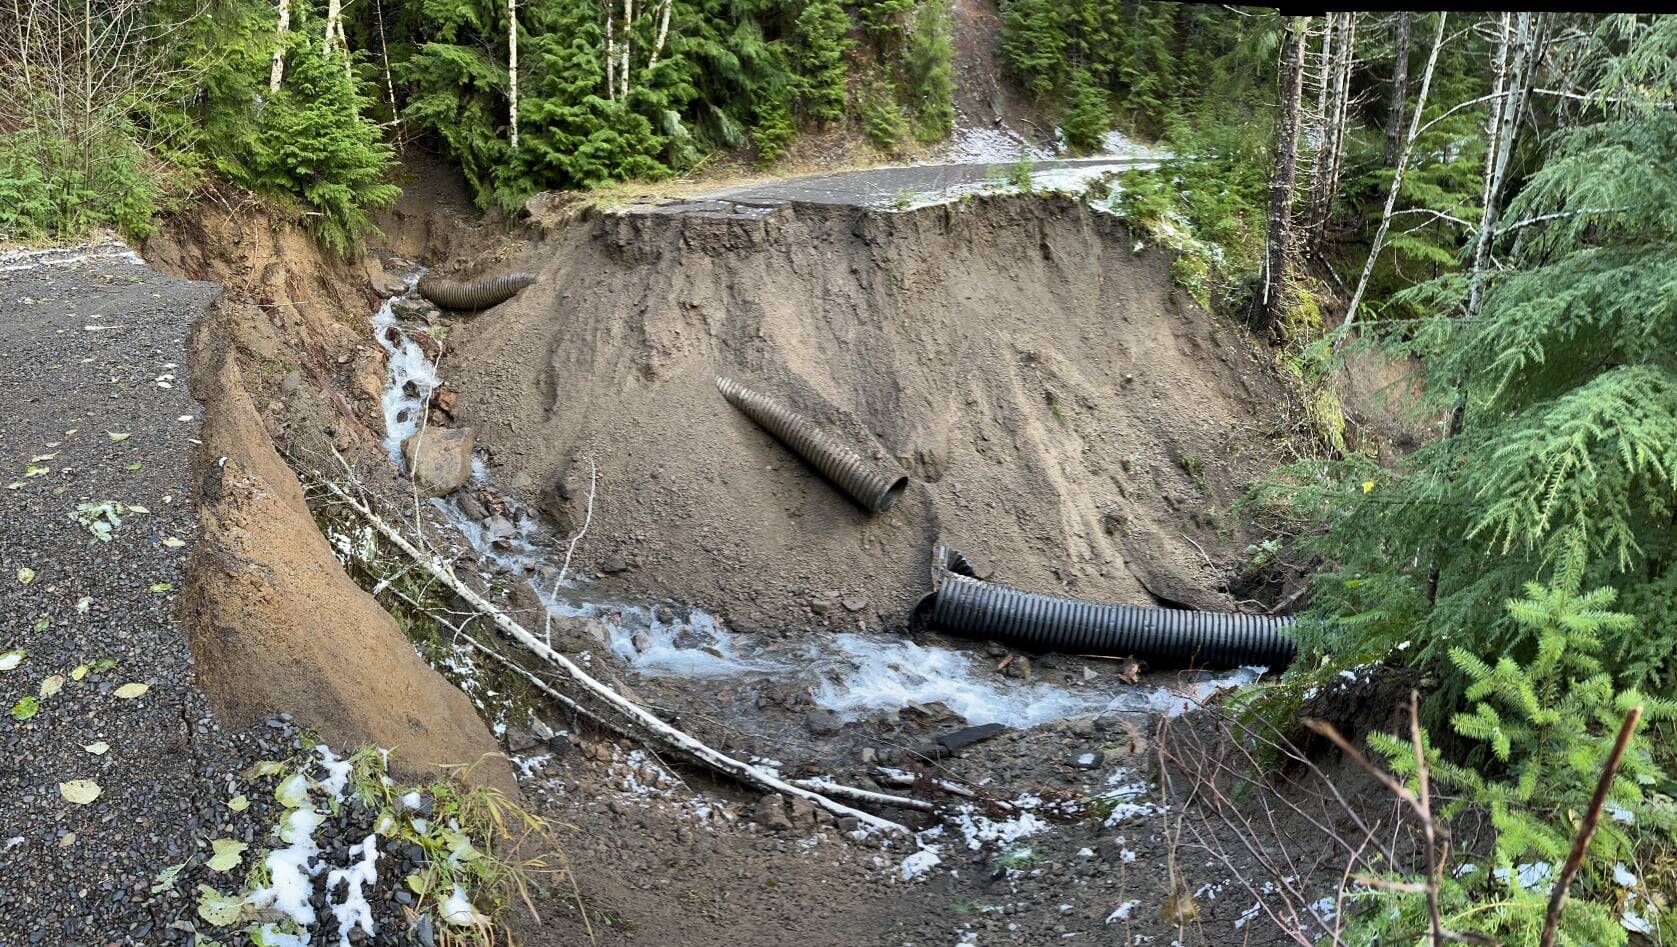 Road washout and culvert damage at MP 33.9 on the 29 Road, (“A” Rd.) USFS Photo